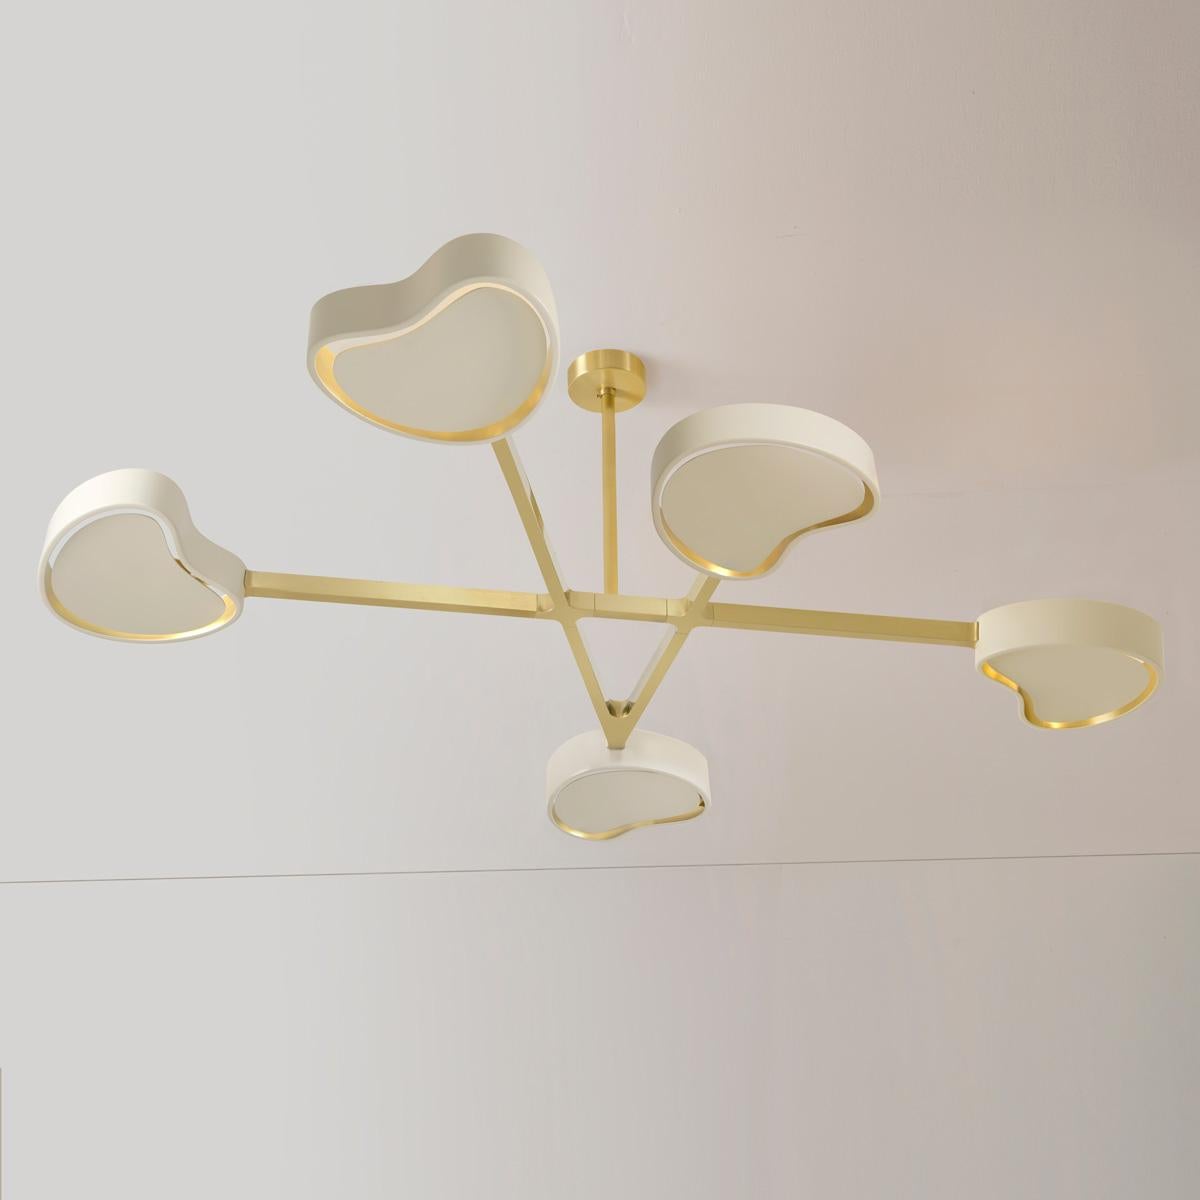 Cuore N.5 Ceiling Light by Gaspare Asaro. Polished Brass Finish In New Condition For Sale In New York, NY